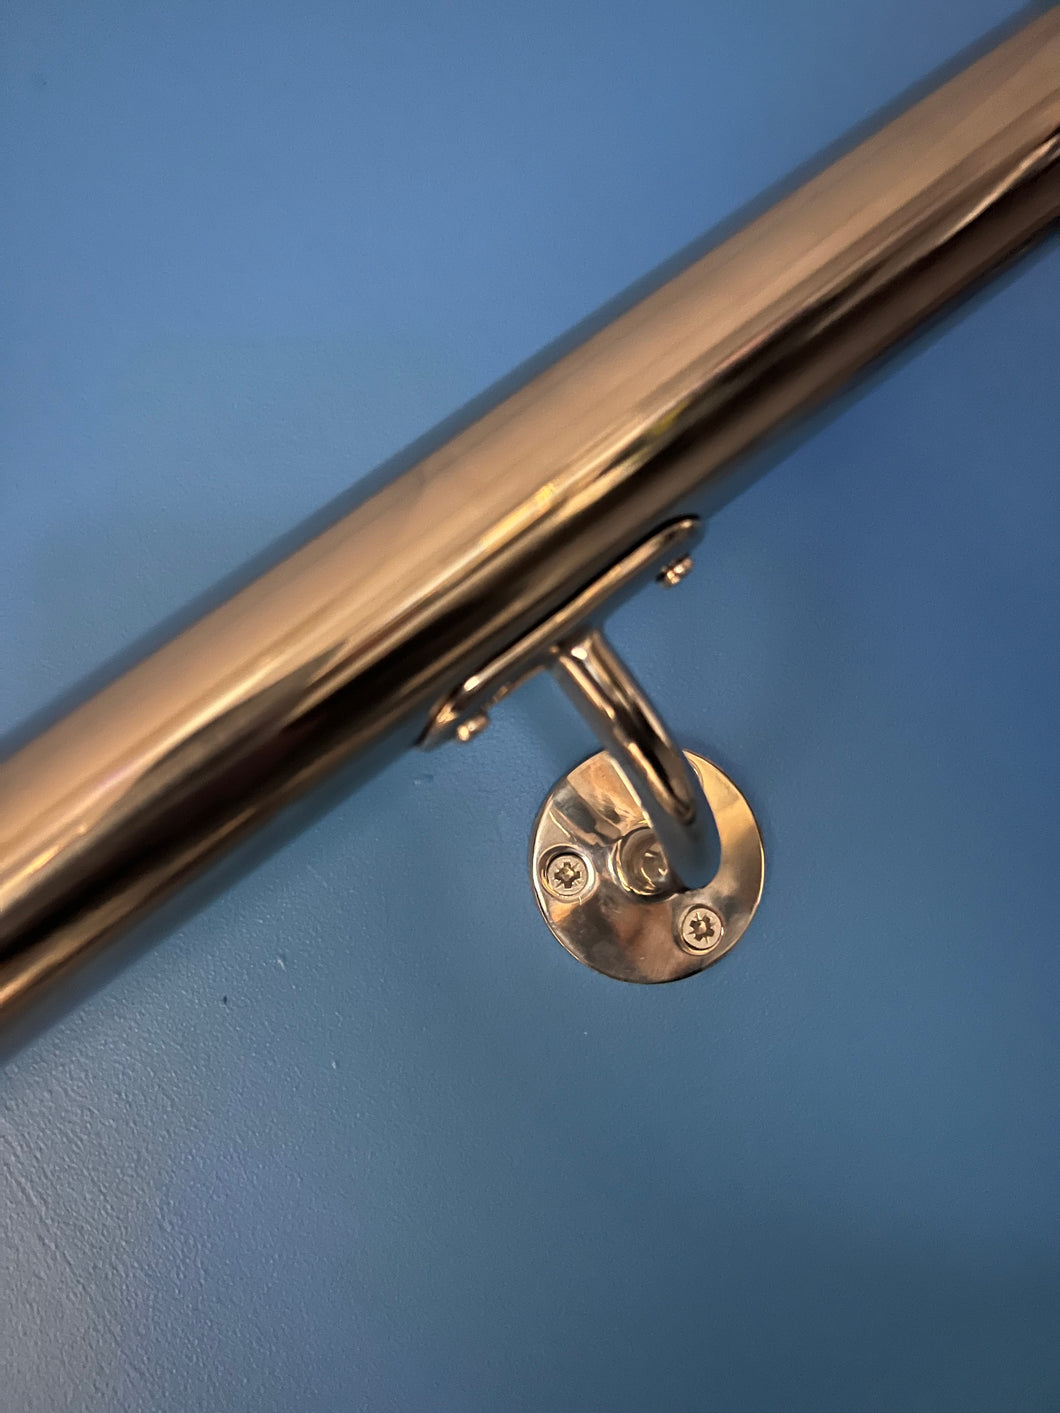 Stainless Steel Handrail With Flat Ends- External Grade 316- Anti Corrosion Mirror Polished